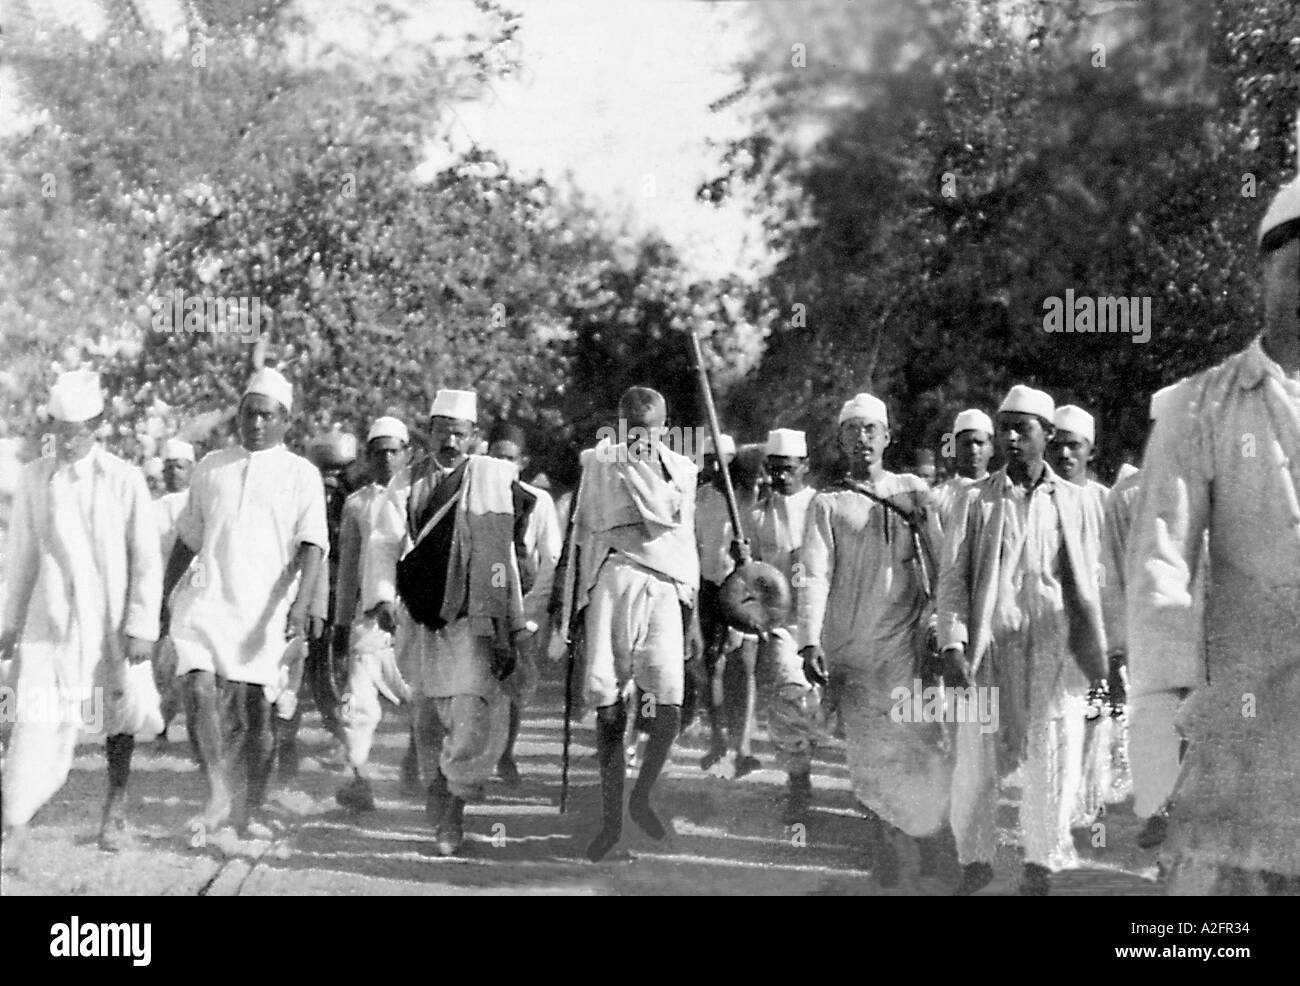 Mahatma Gandhi leading the salt agitation march in India for freedom from British Empire rule, Dandi March, 12 March 1930, old vintage 1900s picture Stock Photo